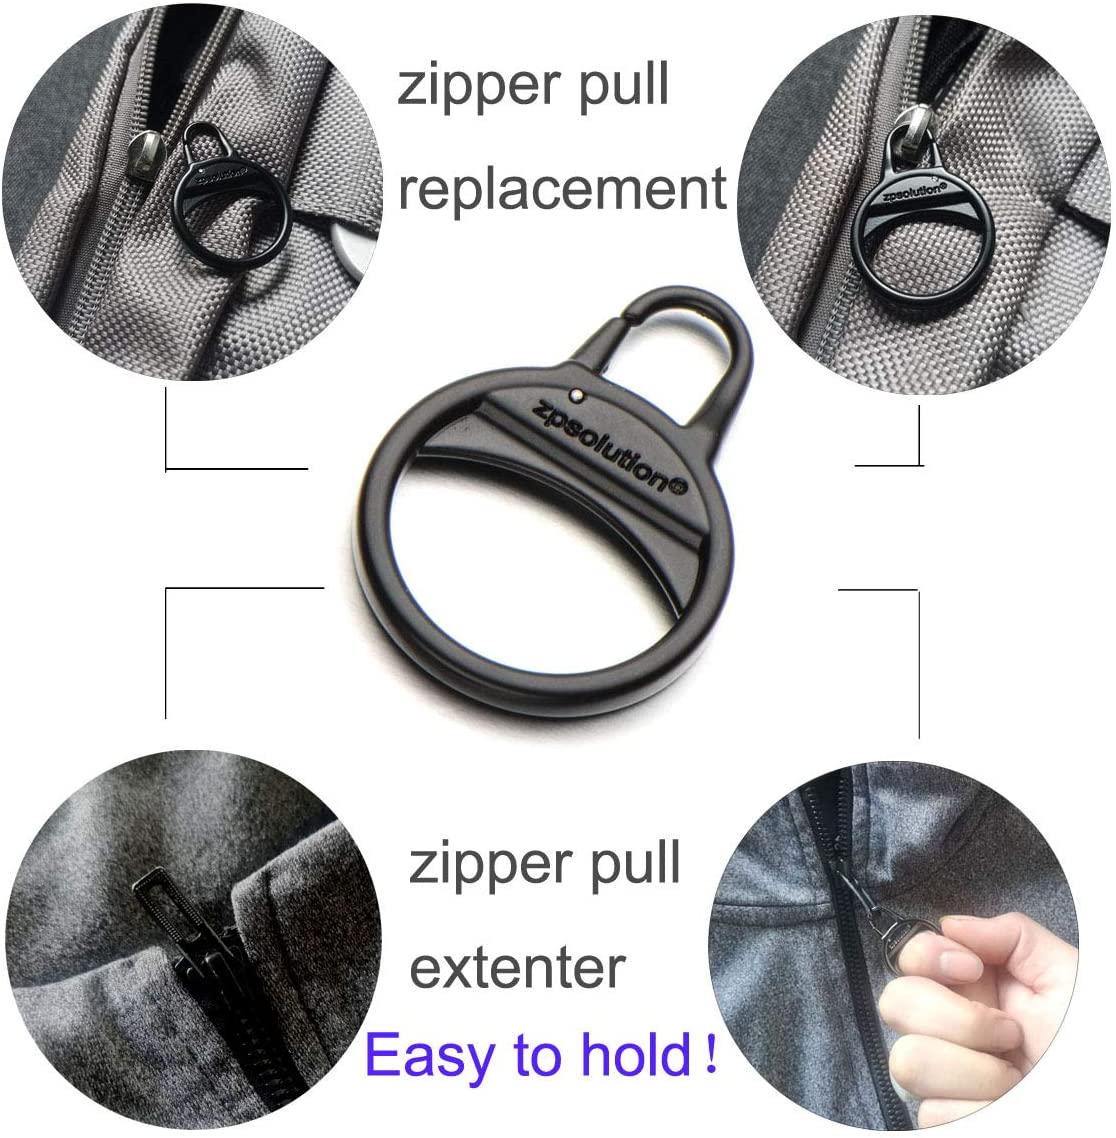 Zipper Tab Repair for Clothes Jackets Coats Sweaters Boots Shoes Backpack